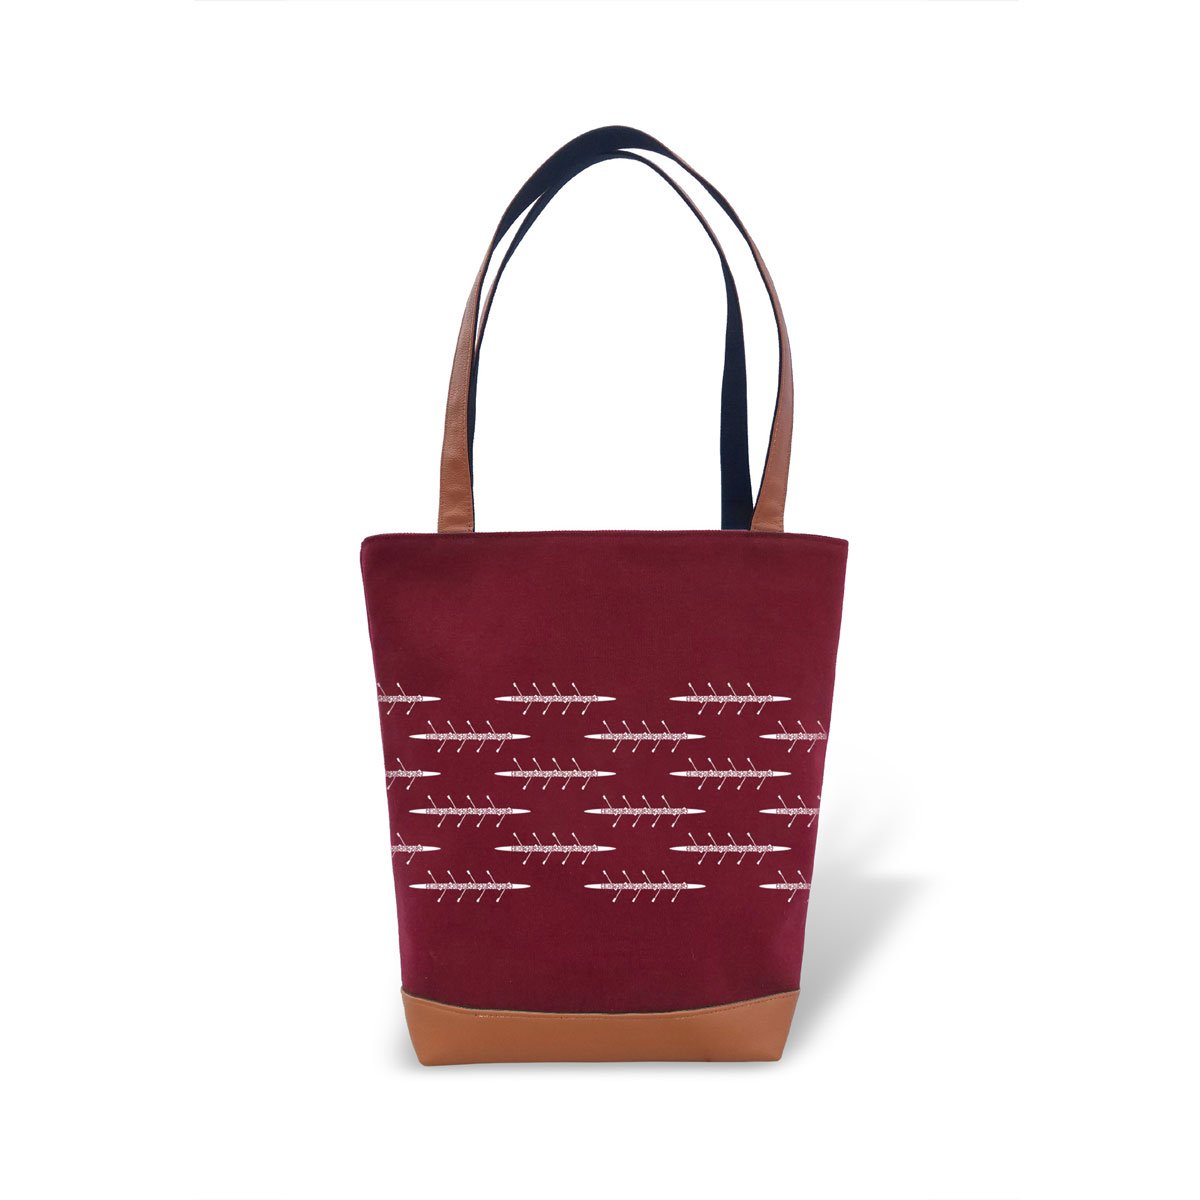 Tote Bag - Classic - Strokeside Designs Rowing jewelry- Rowing Gifts Ideas- Rowing Coach Gifts